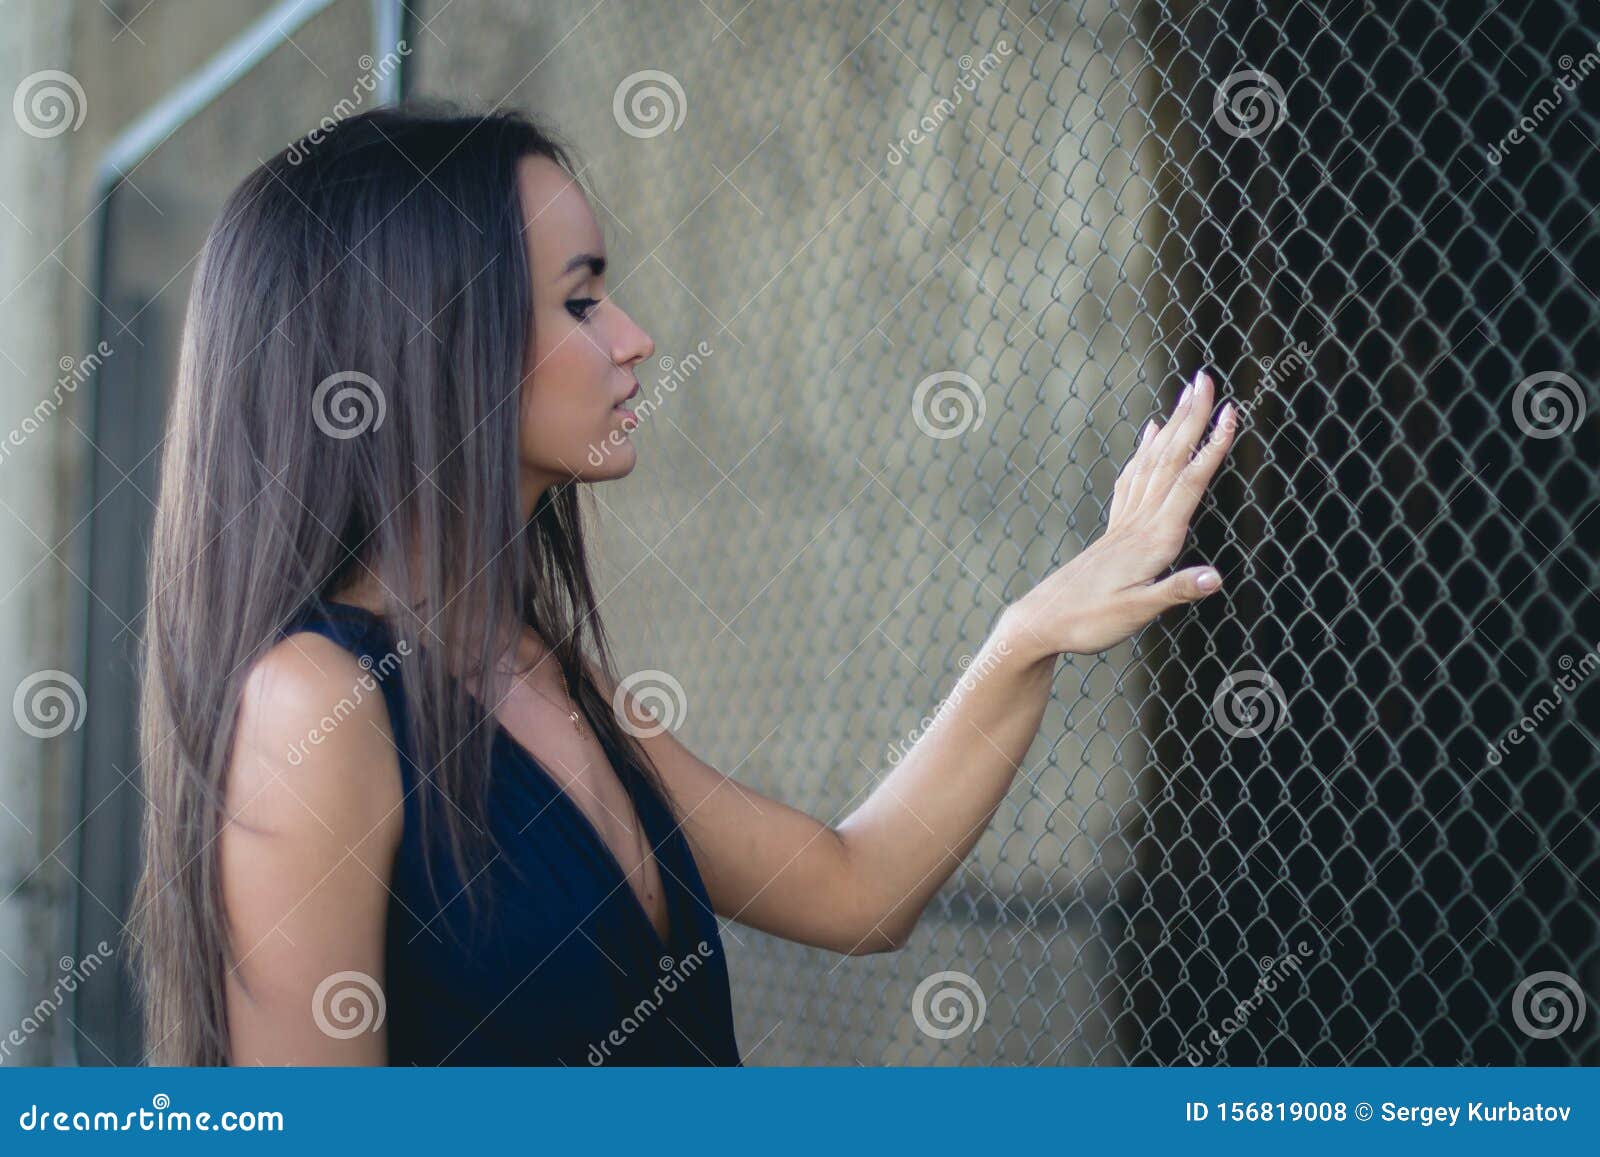 Young Beauty Woman Posing Over Metal Fence Background Stock Photo